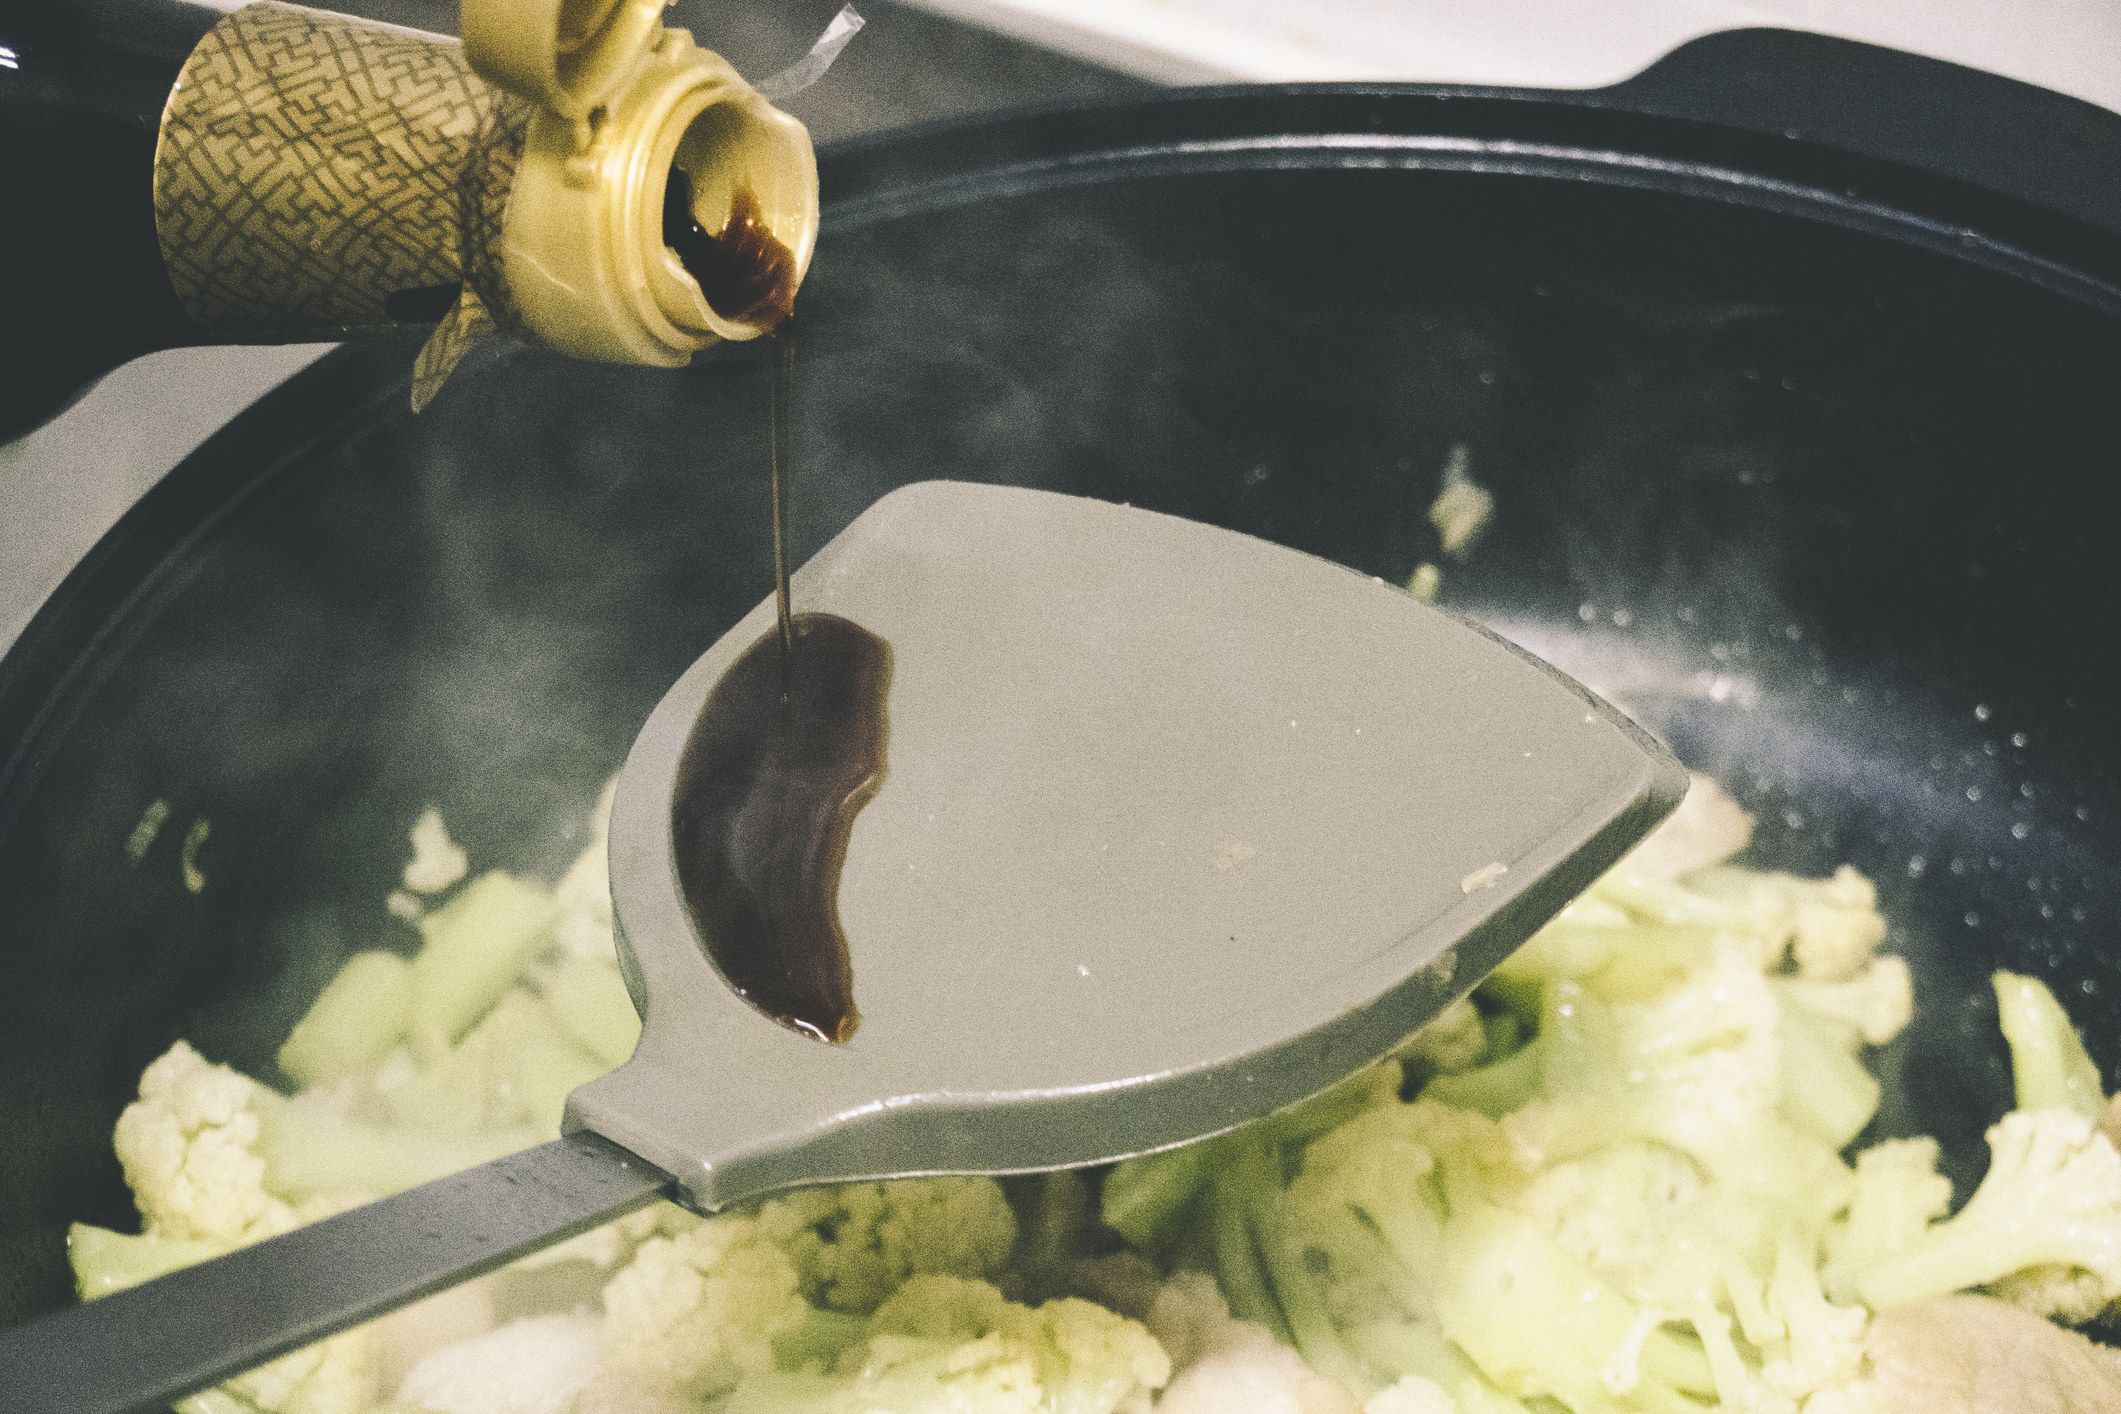 Adding soy sauce to a skillet